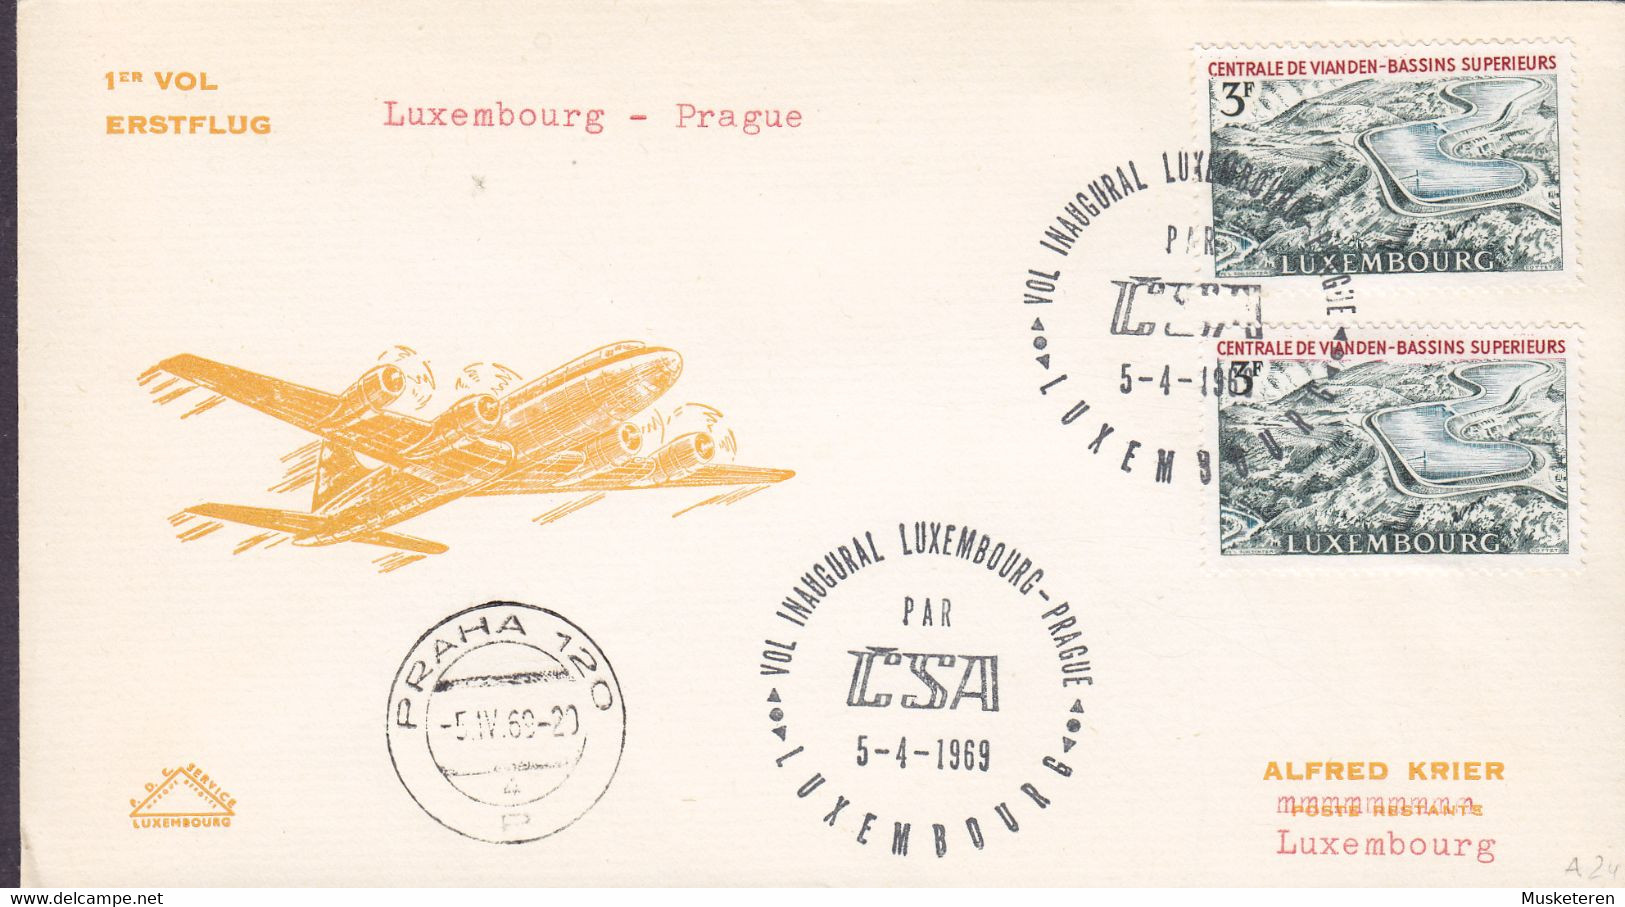 Luxembourg CSA First Flight Premier Vol LUXEMBOURG - PRAGUE, LUXEMBOURG 1969 Cover Brief Lettre - Storia Postale